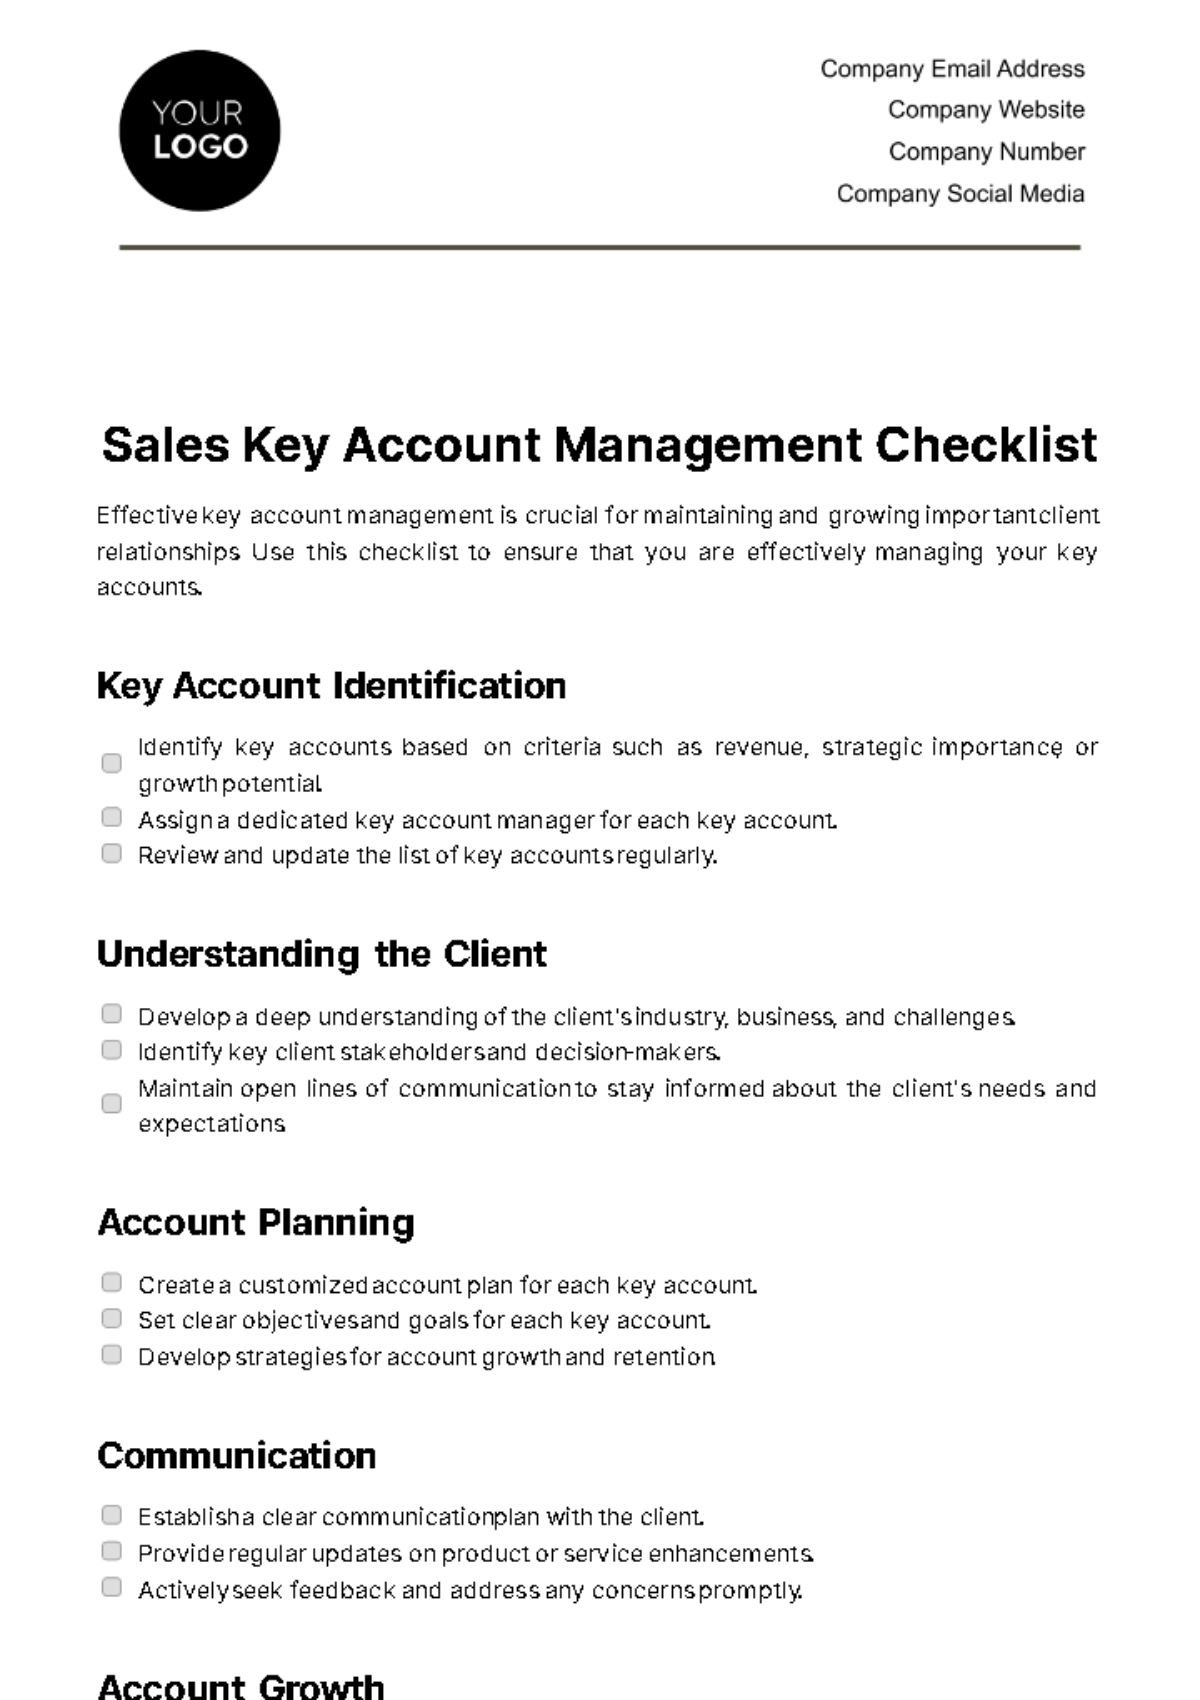 Free Sales Key Account Management Checklist Template